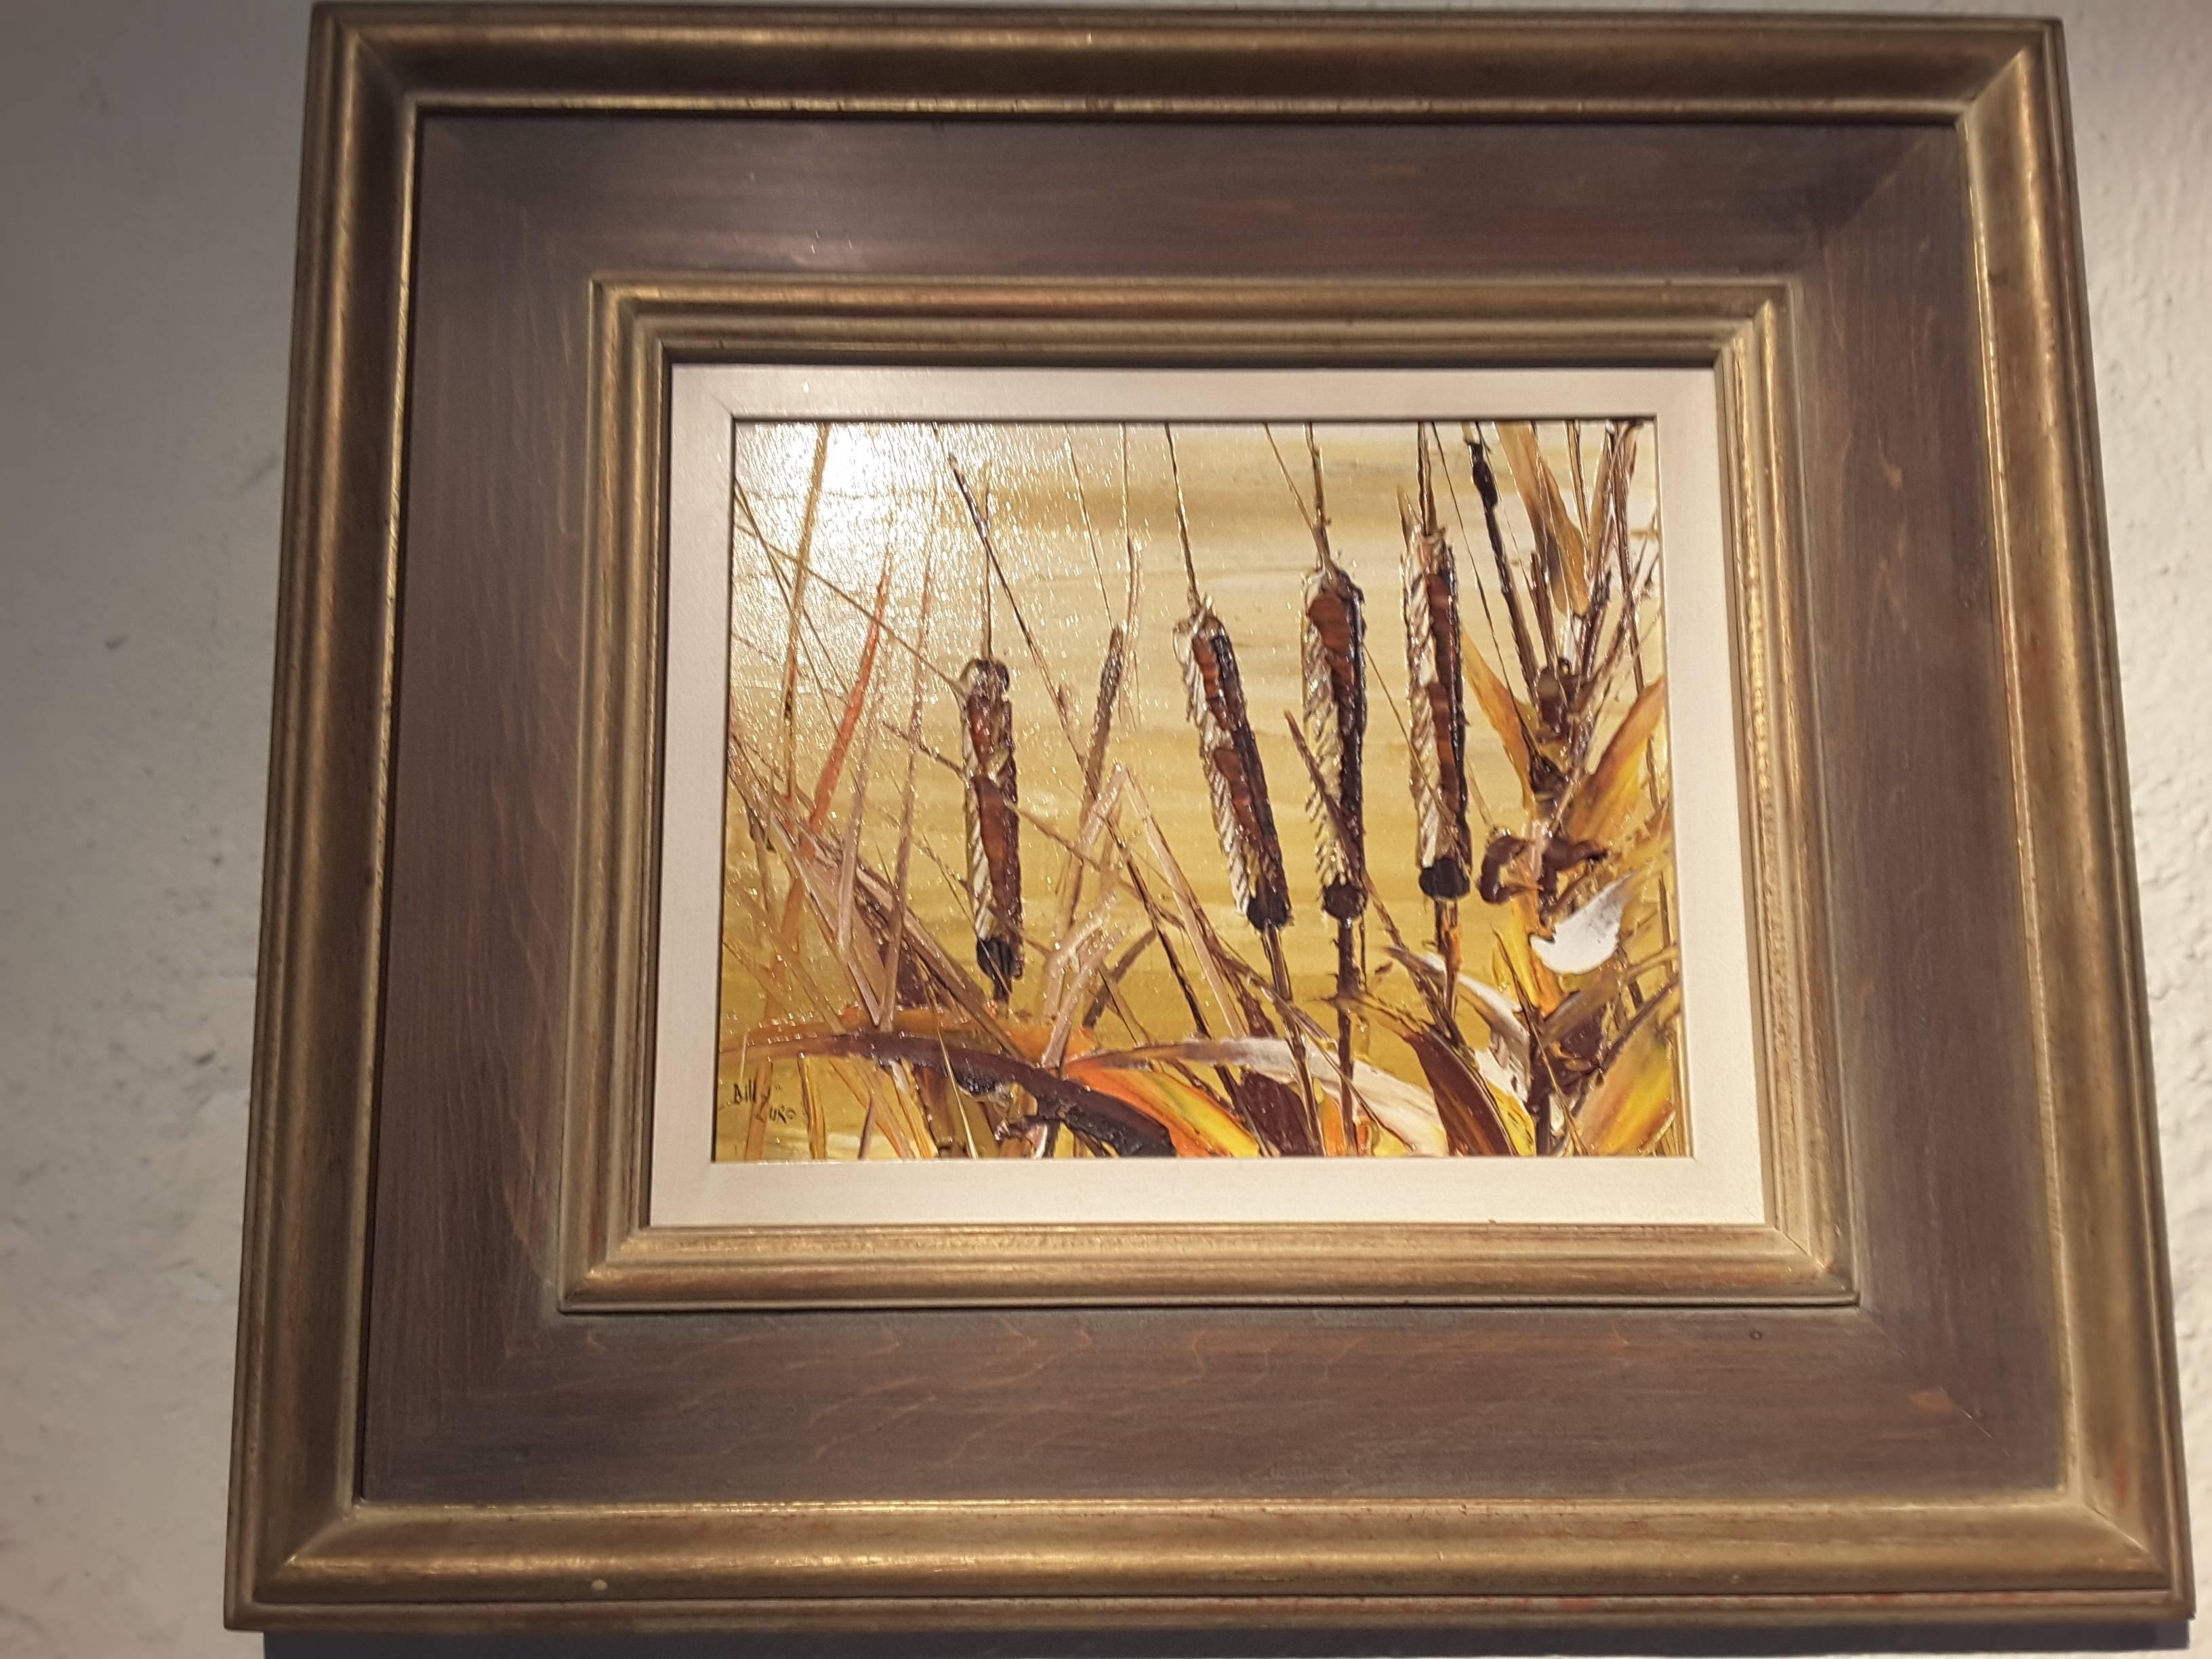 Bill Zuro, acrylic on panel, titled Cat Tails, Canadian artist, original label verso, with information and details. The panel measures 8